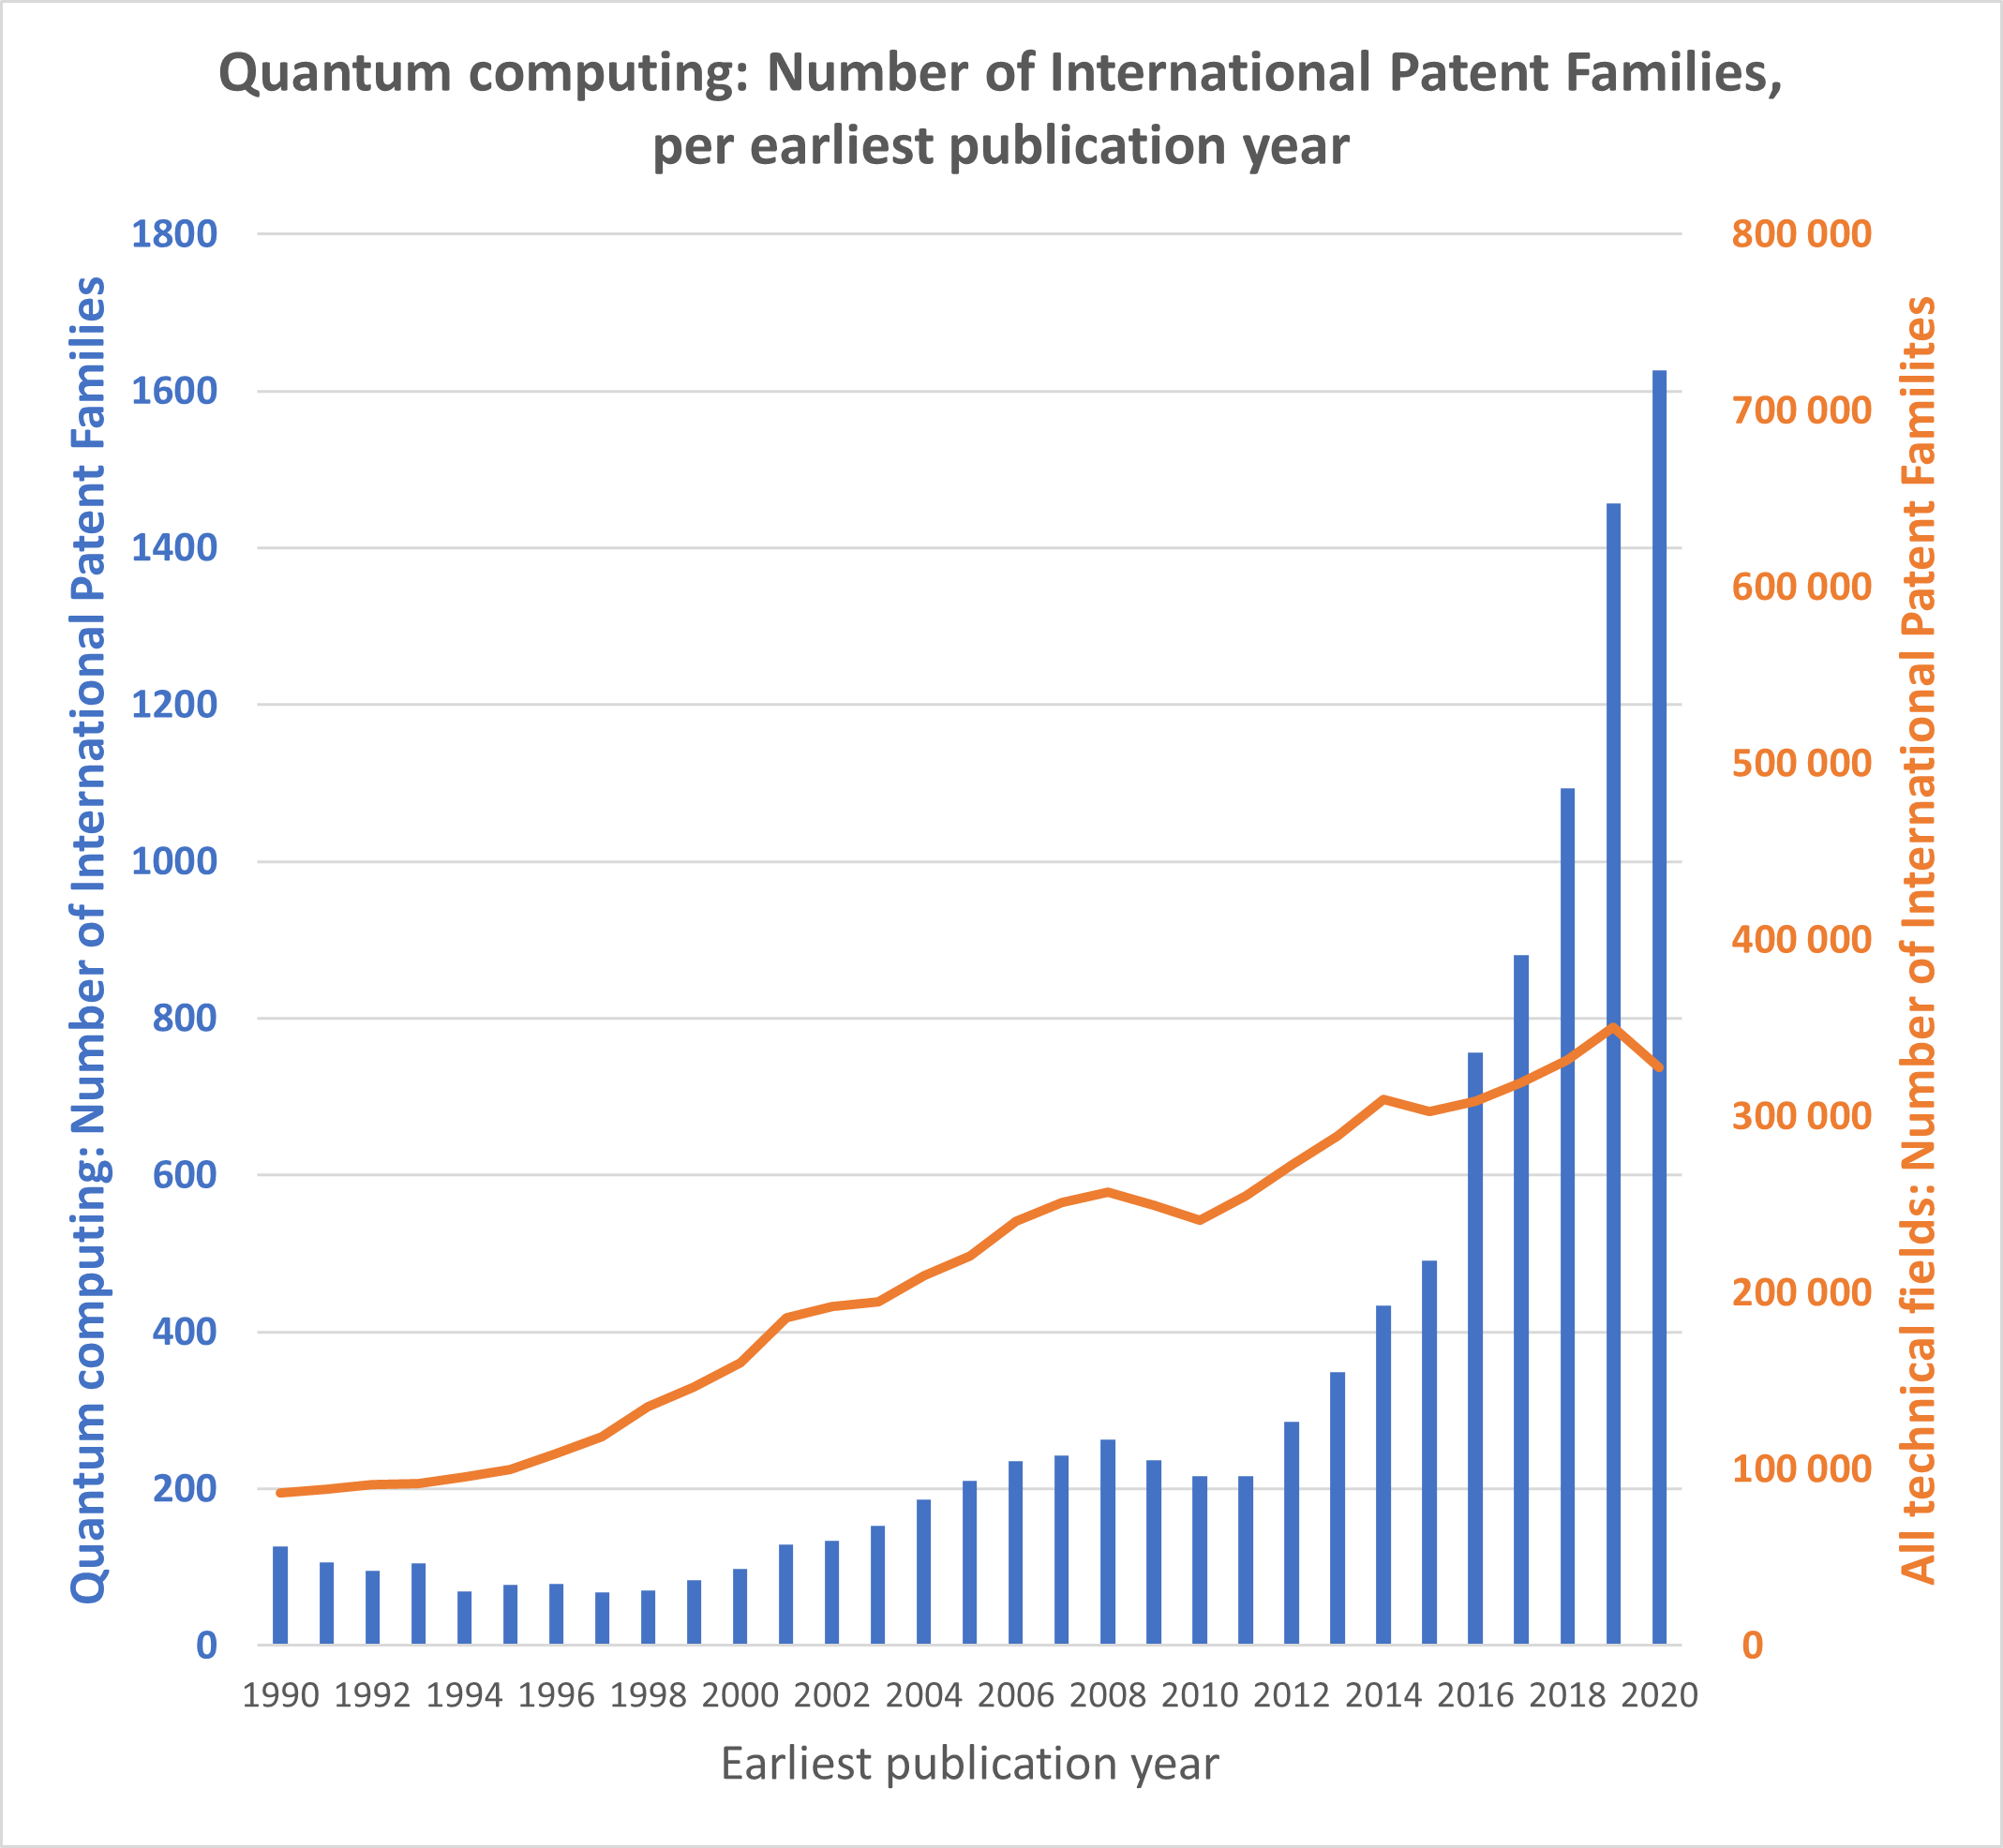 Quantum computing: Number of International Patent Families, per earliest publication year